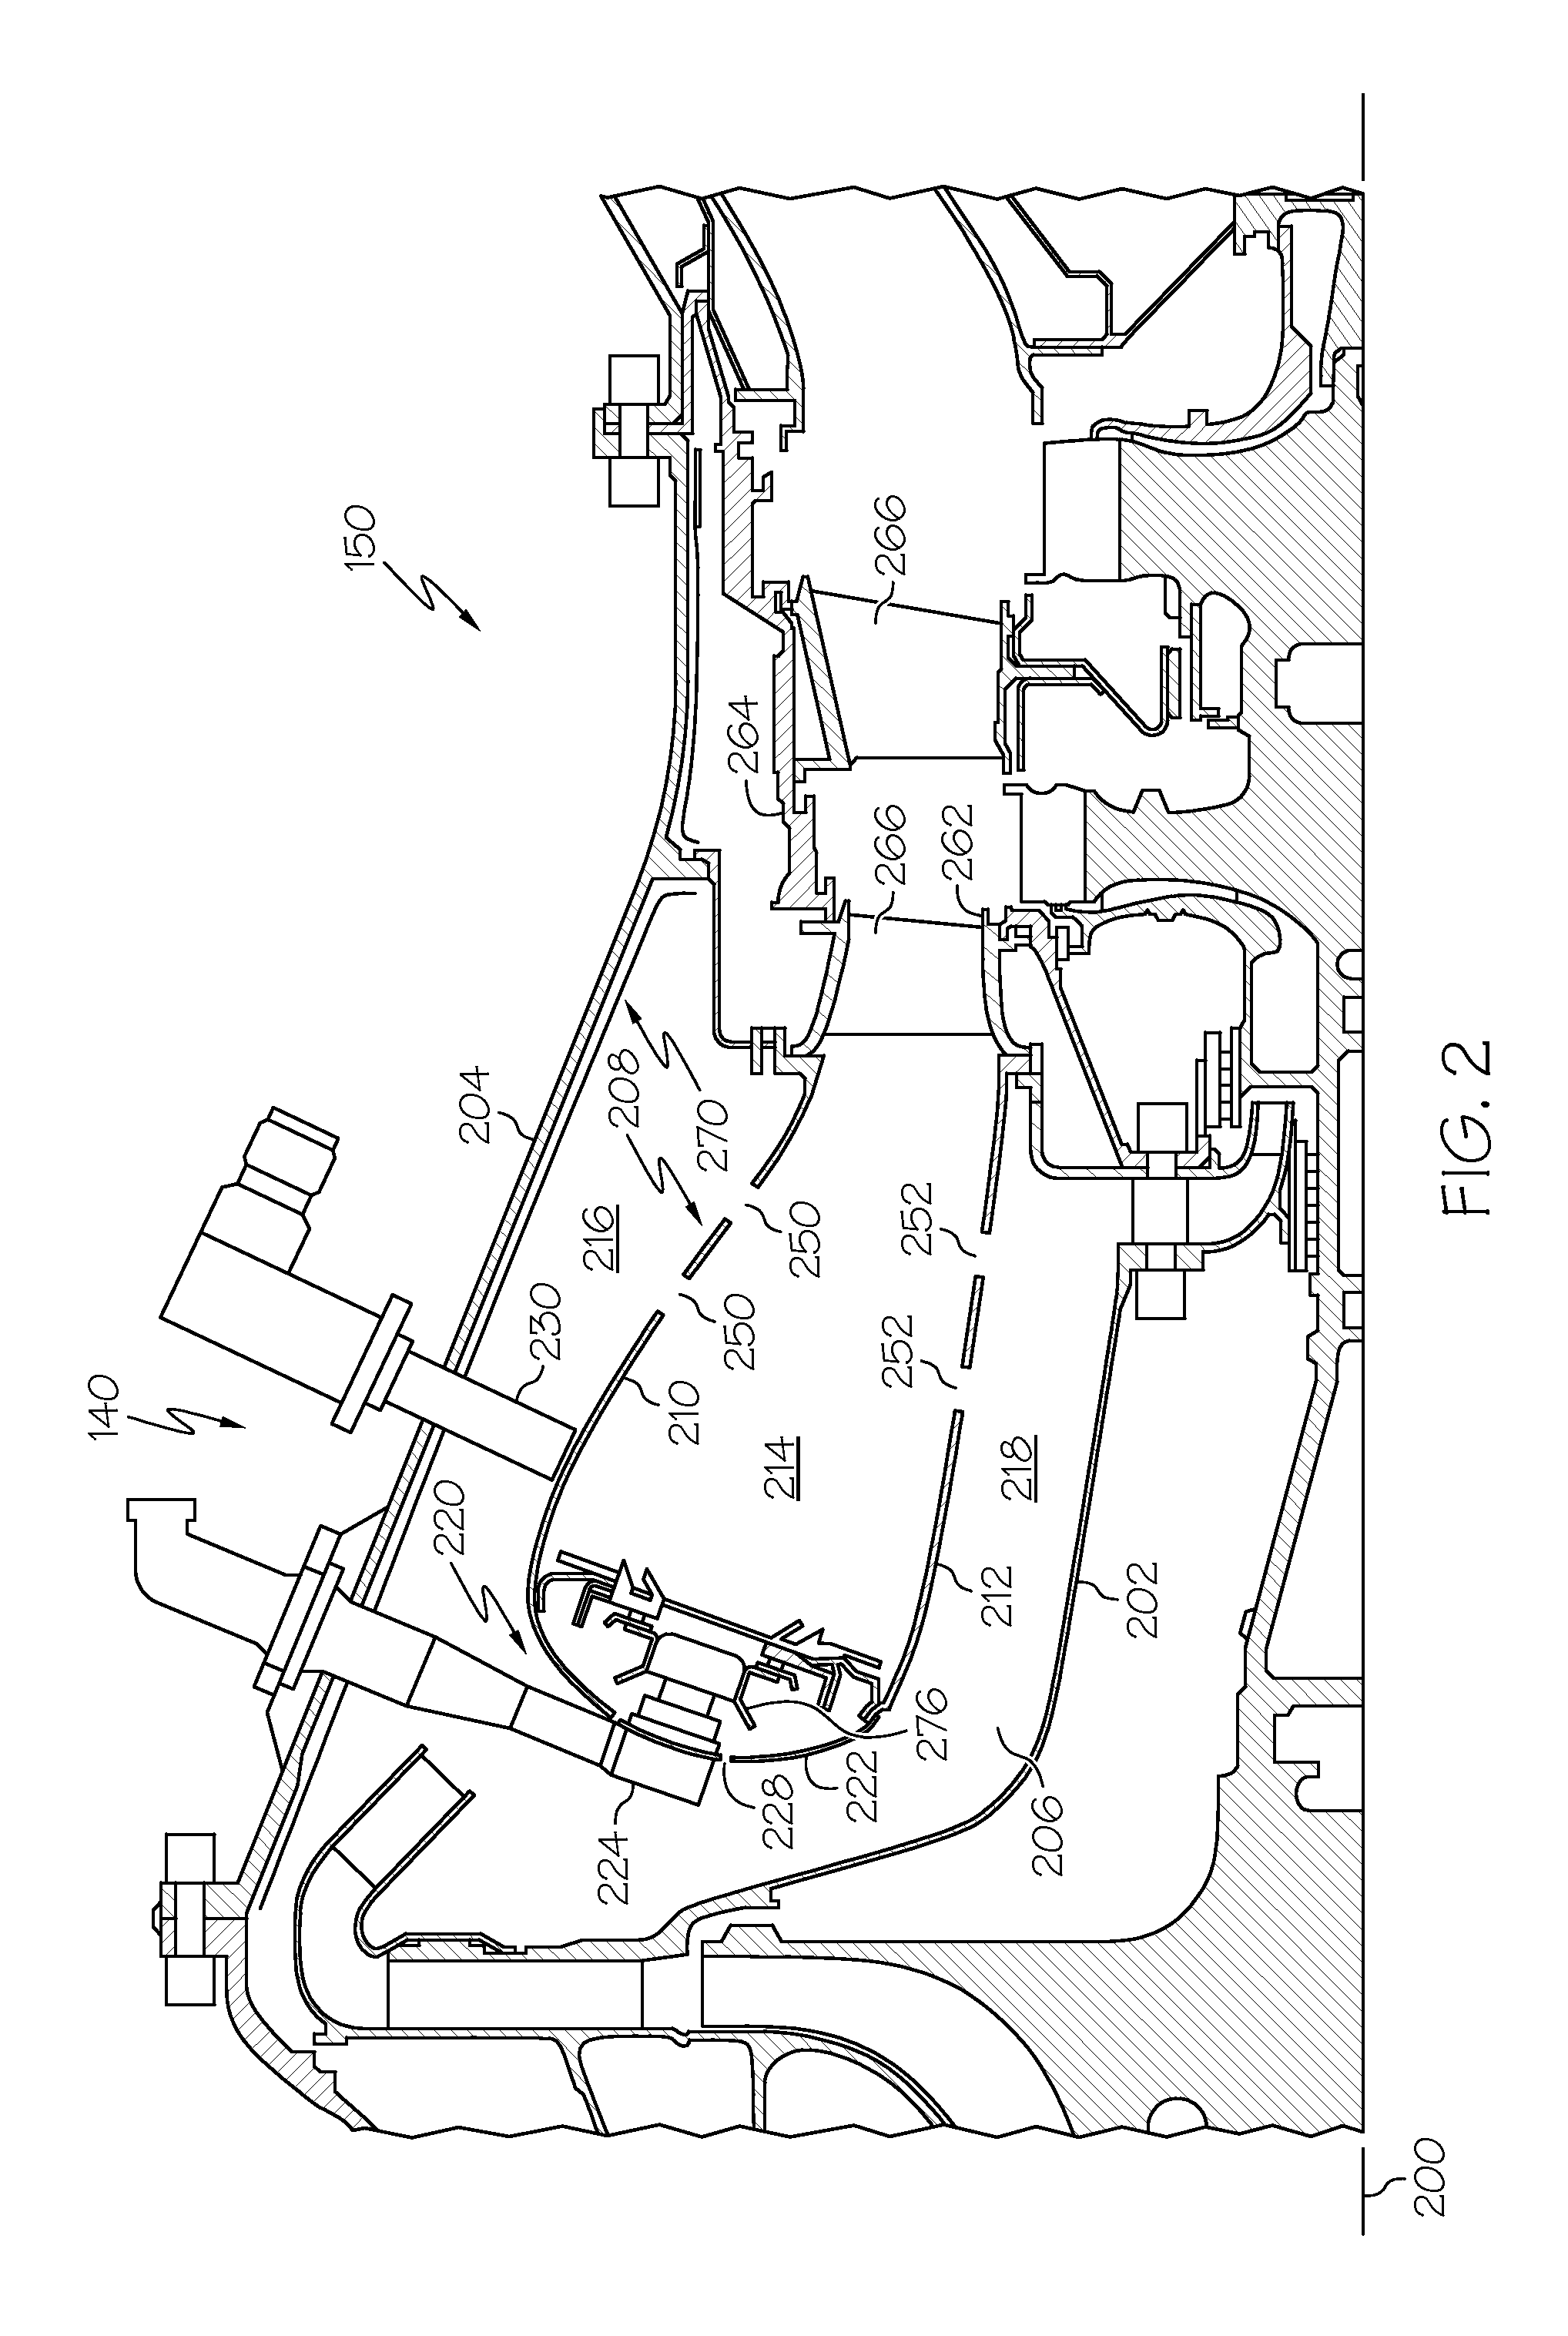 Combustion sections of gas turbine engines with convection shield assemblies